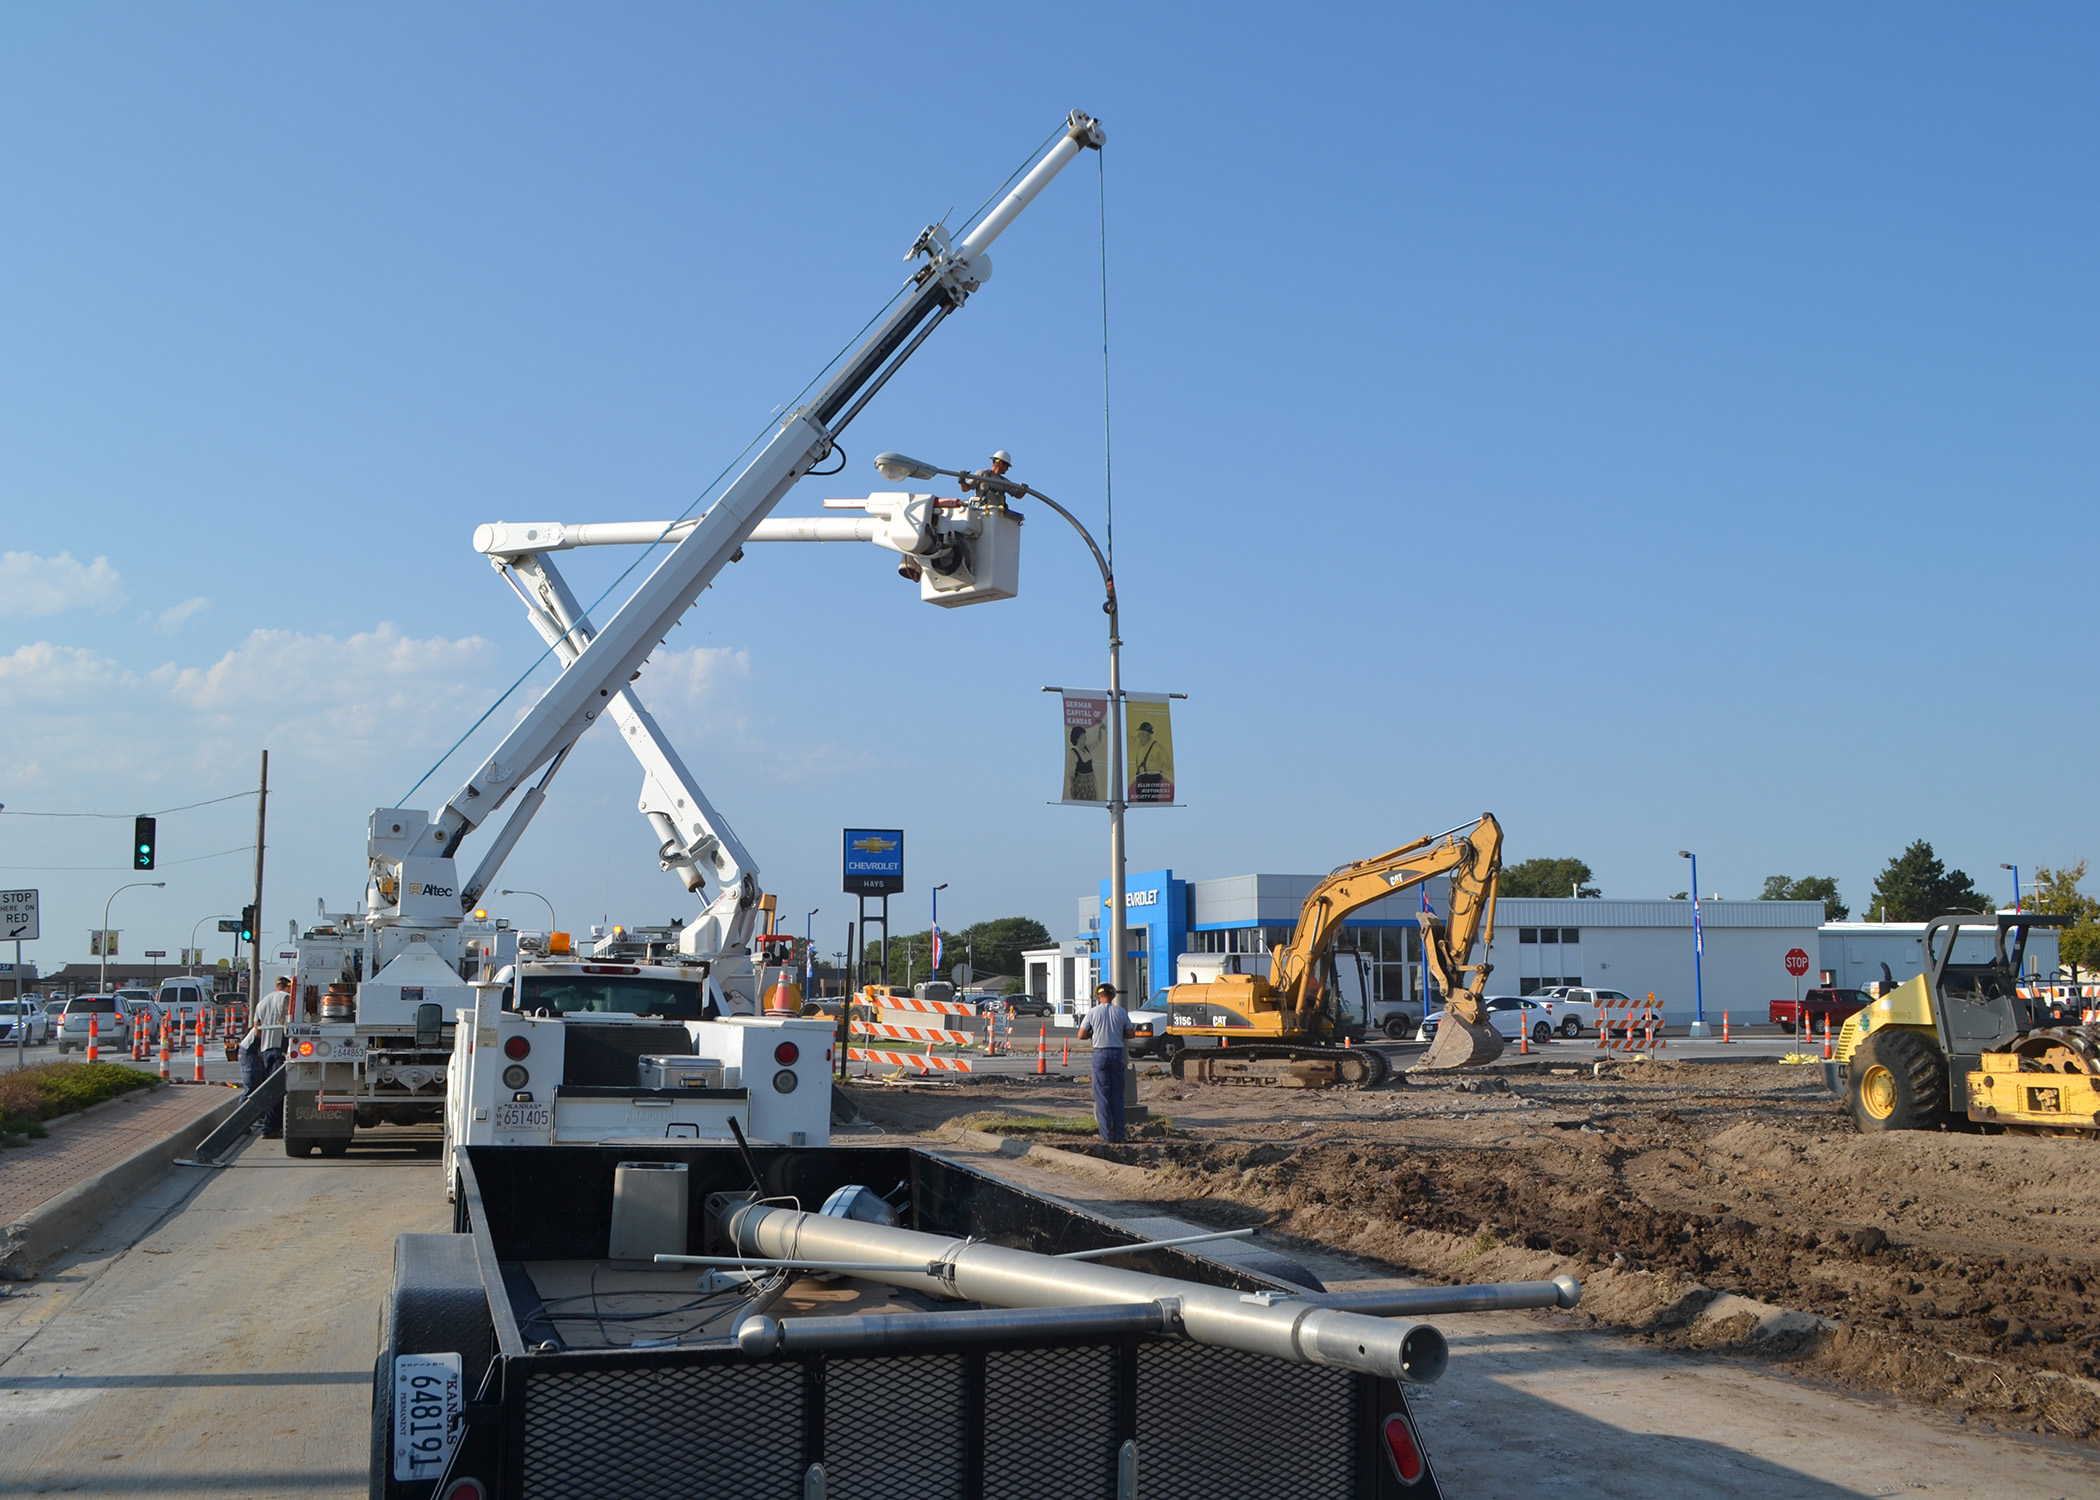 An image of a construction zone, with an electric crew truck lifting a streetlight off of its base; in the foreground are removed streetlights in a trailer, awaiting removal.